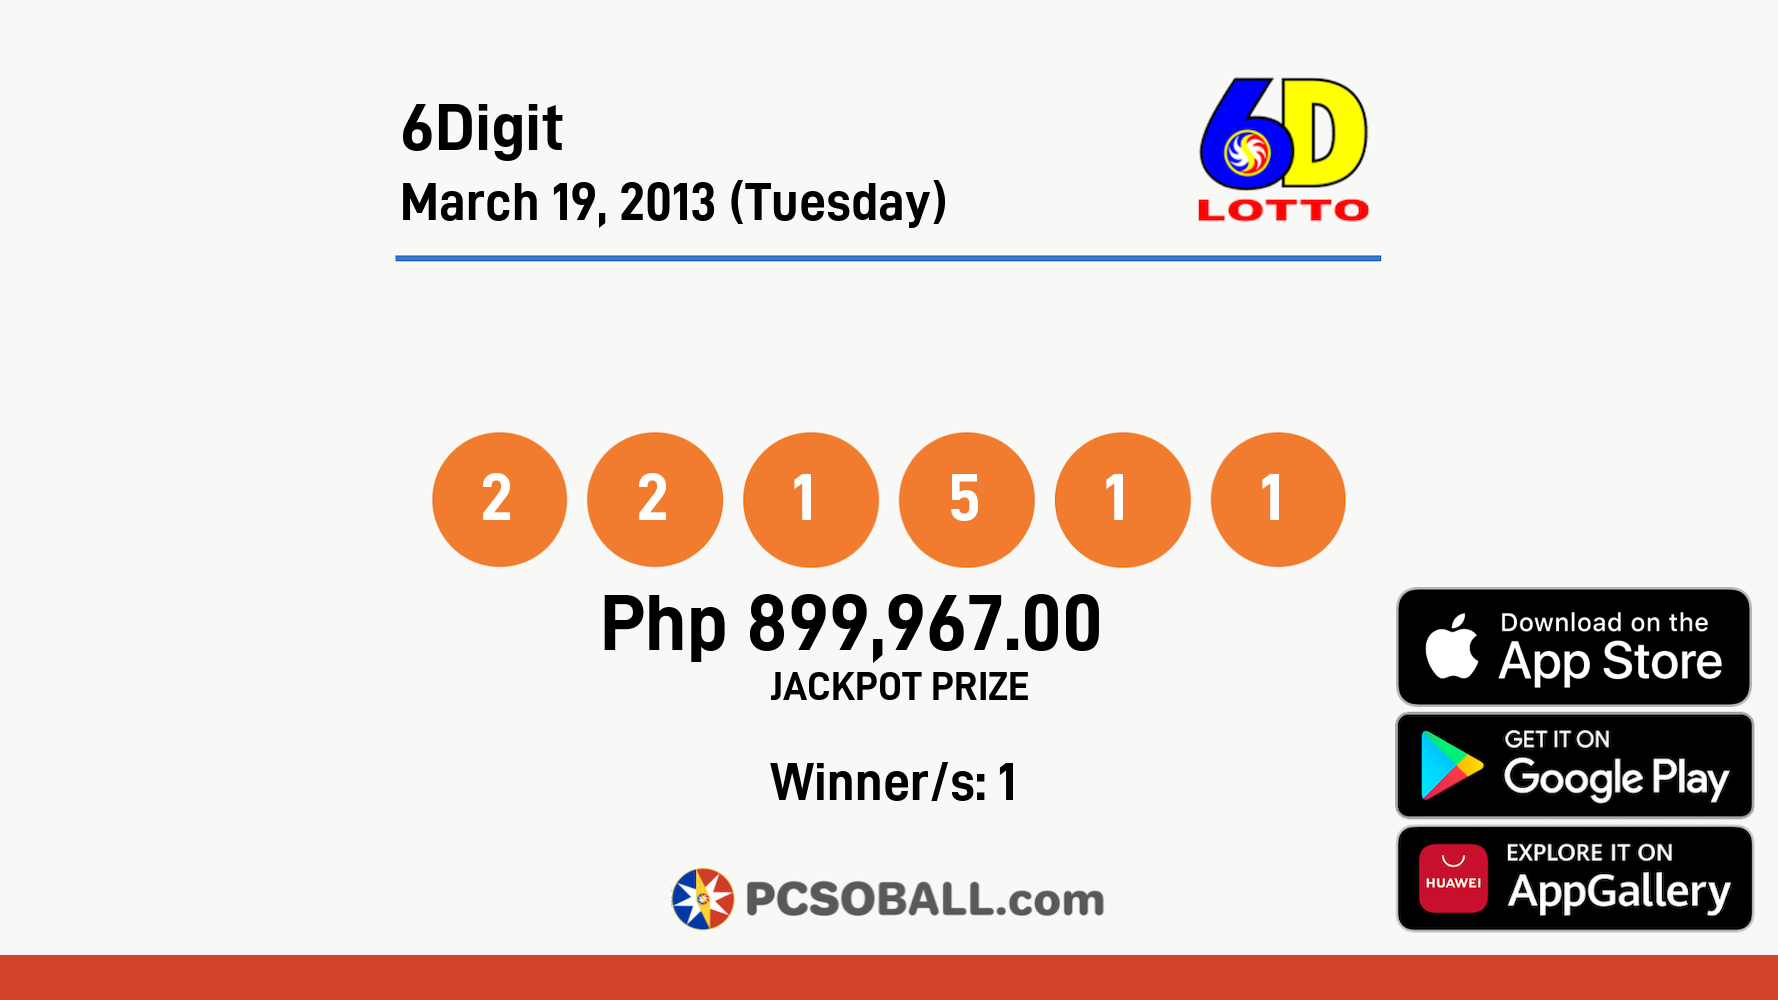 6Digit March 19, 2013 (Tuesday) Result